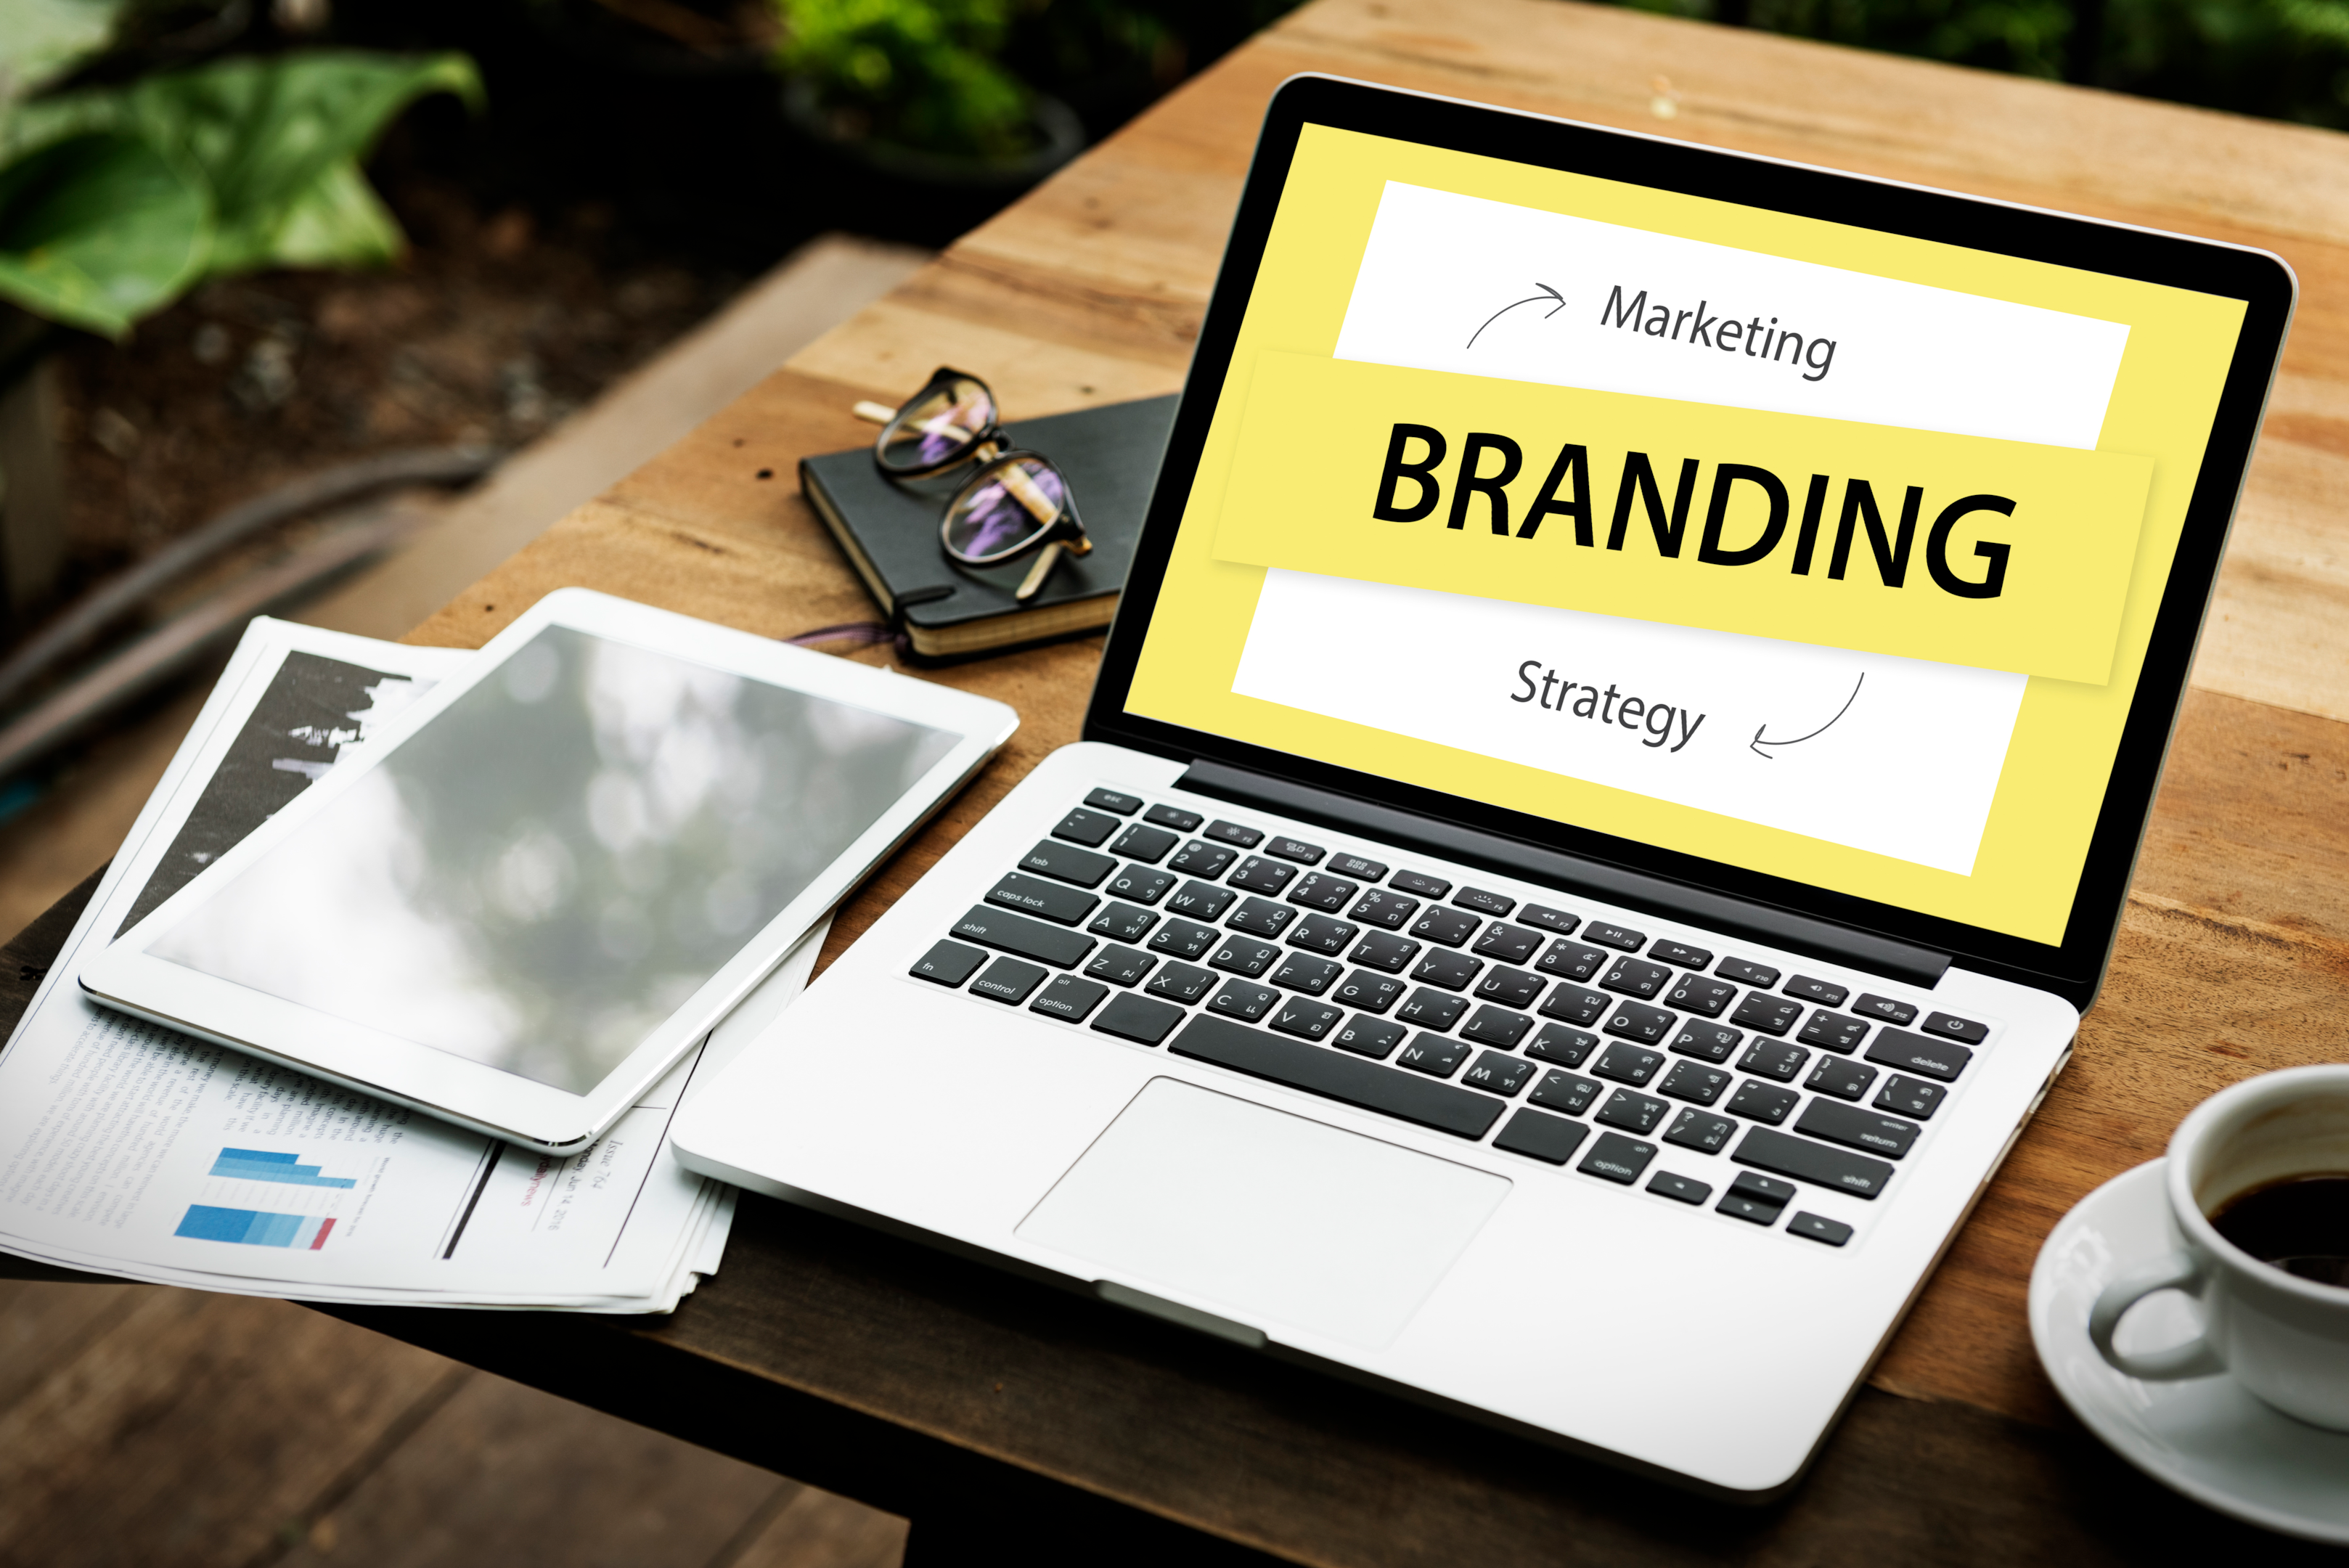 branding experience helps create a lasting memory of your brand